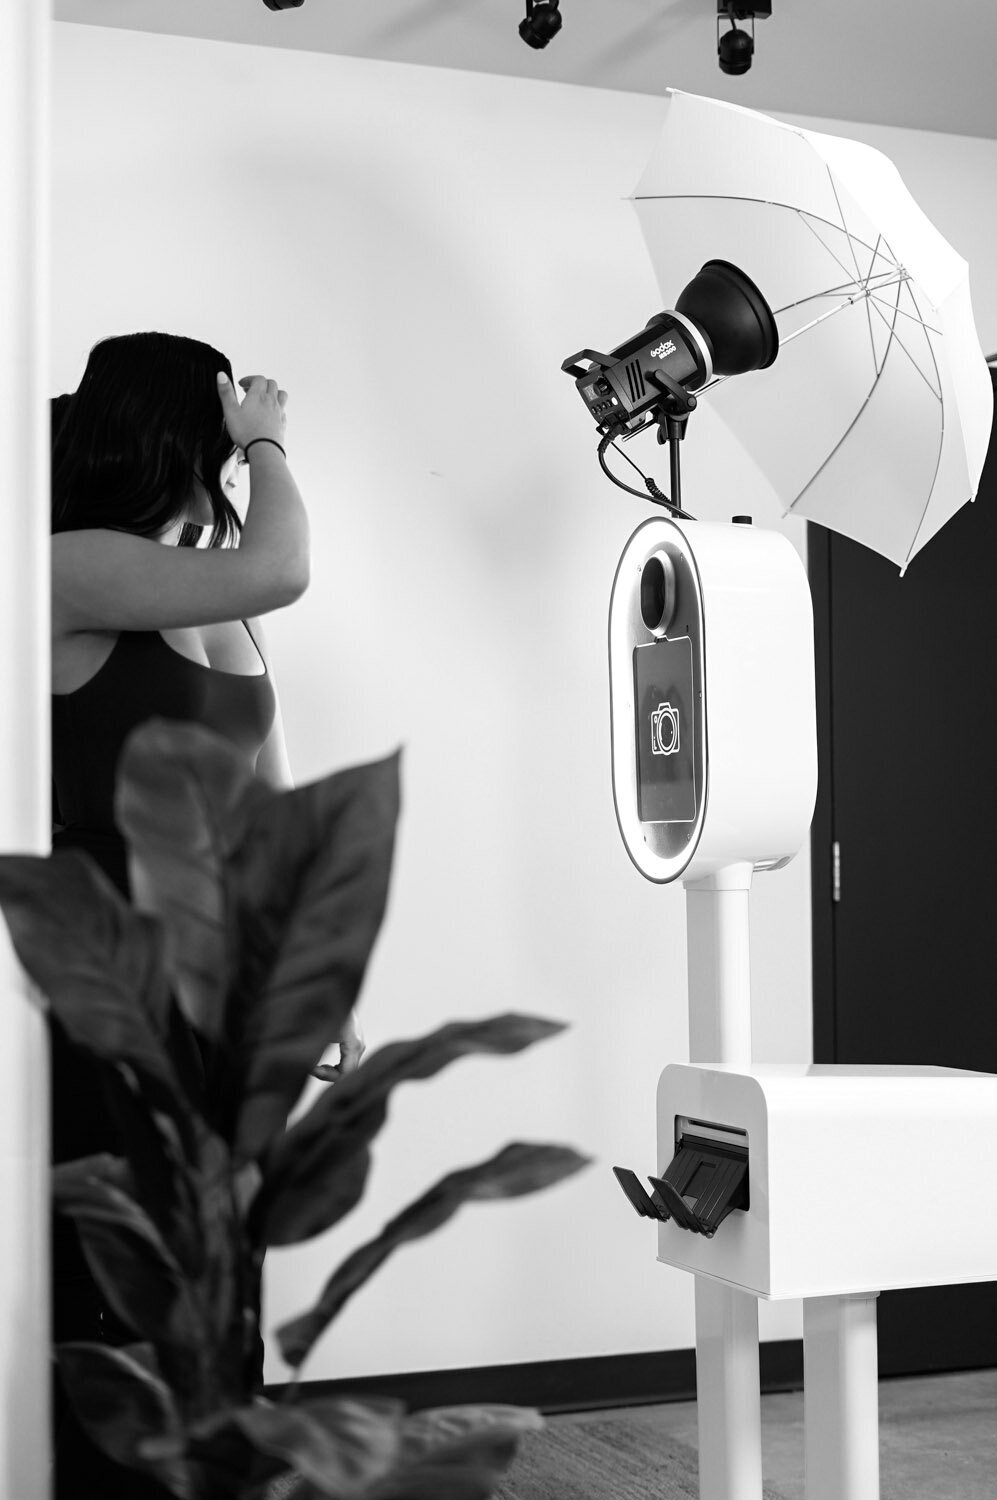 Image of a white photo booth with a light on top and photo printer to the right